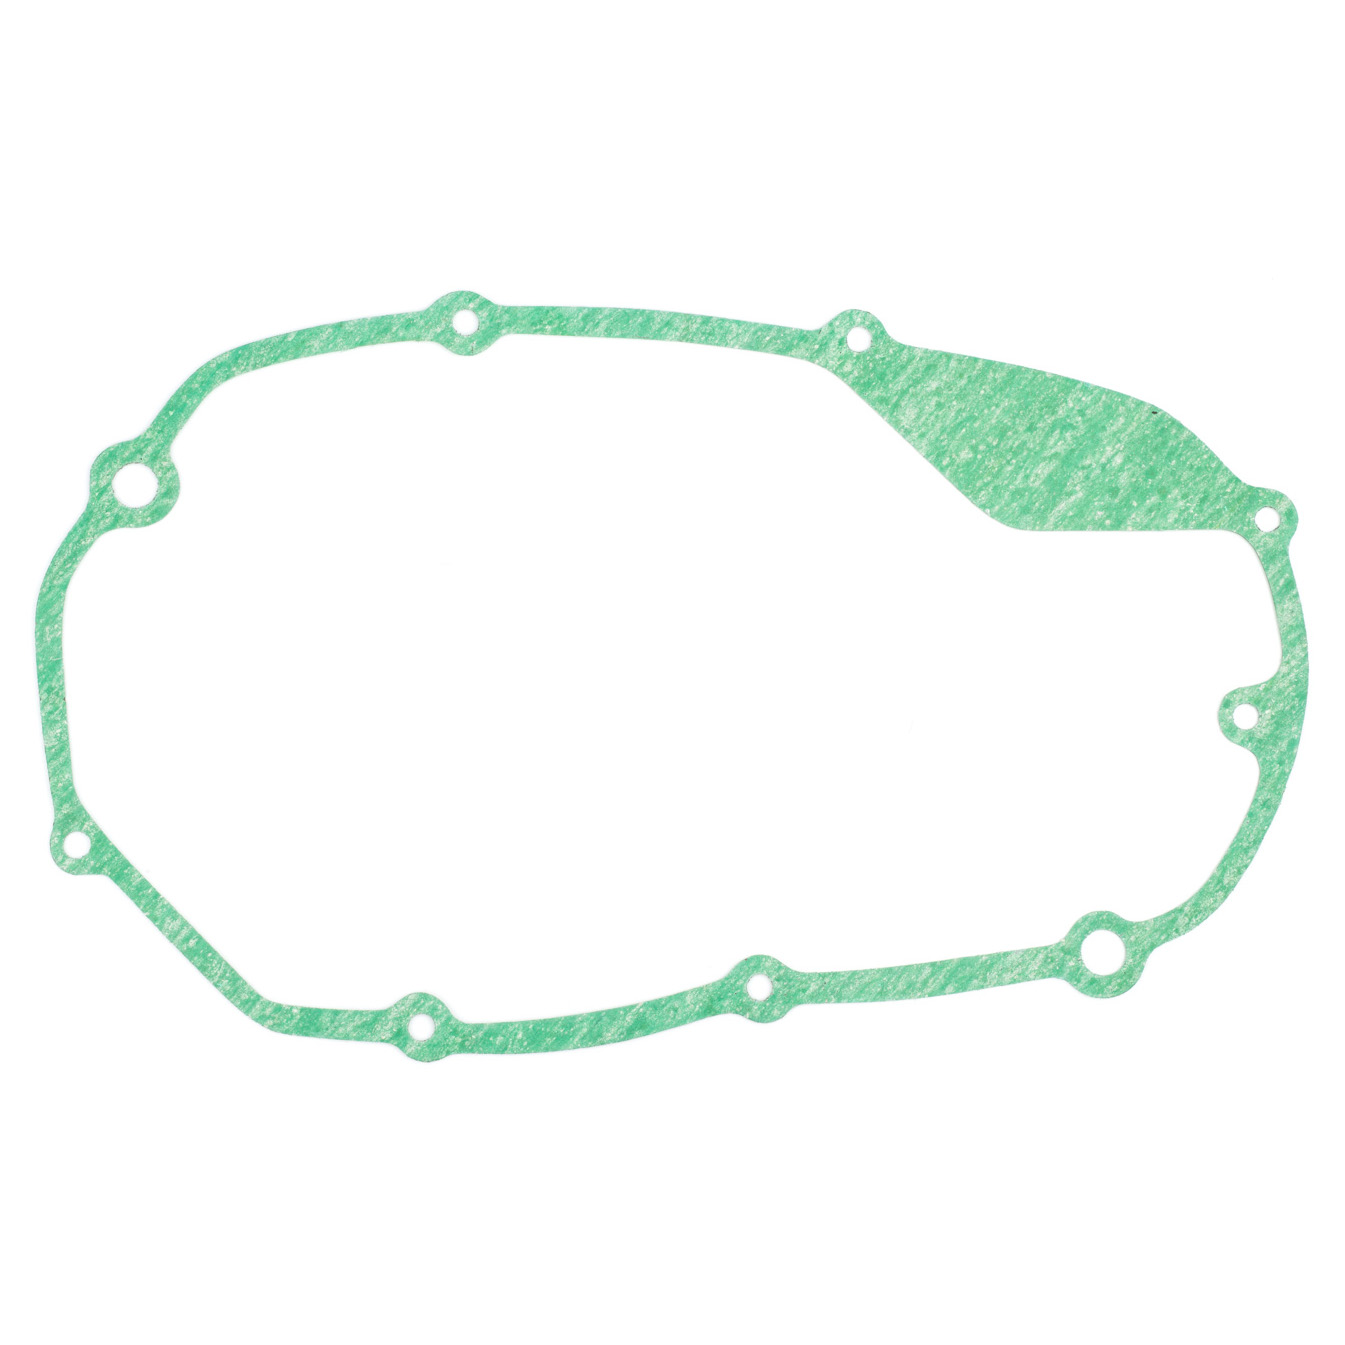 TZ250A Clutch Cover Gasket